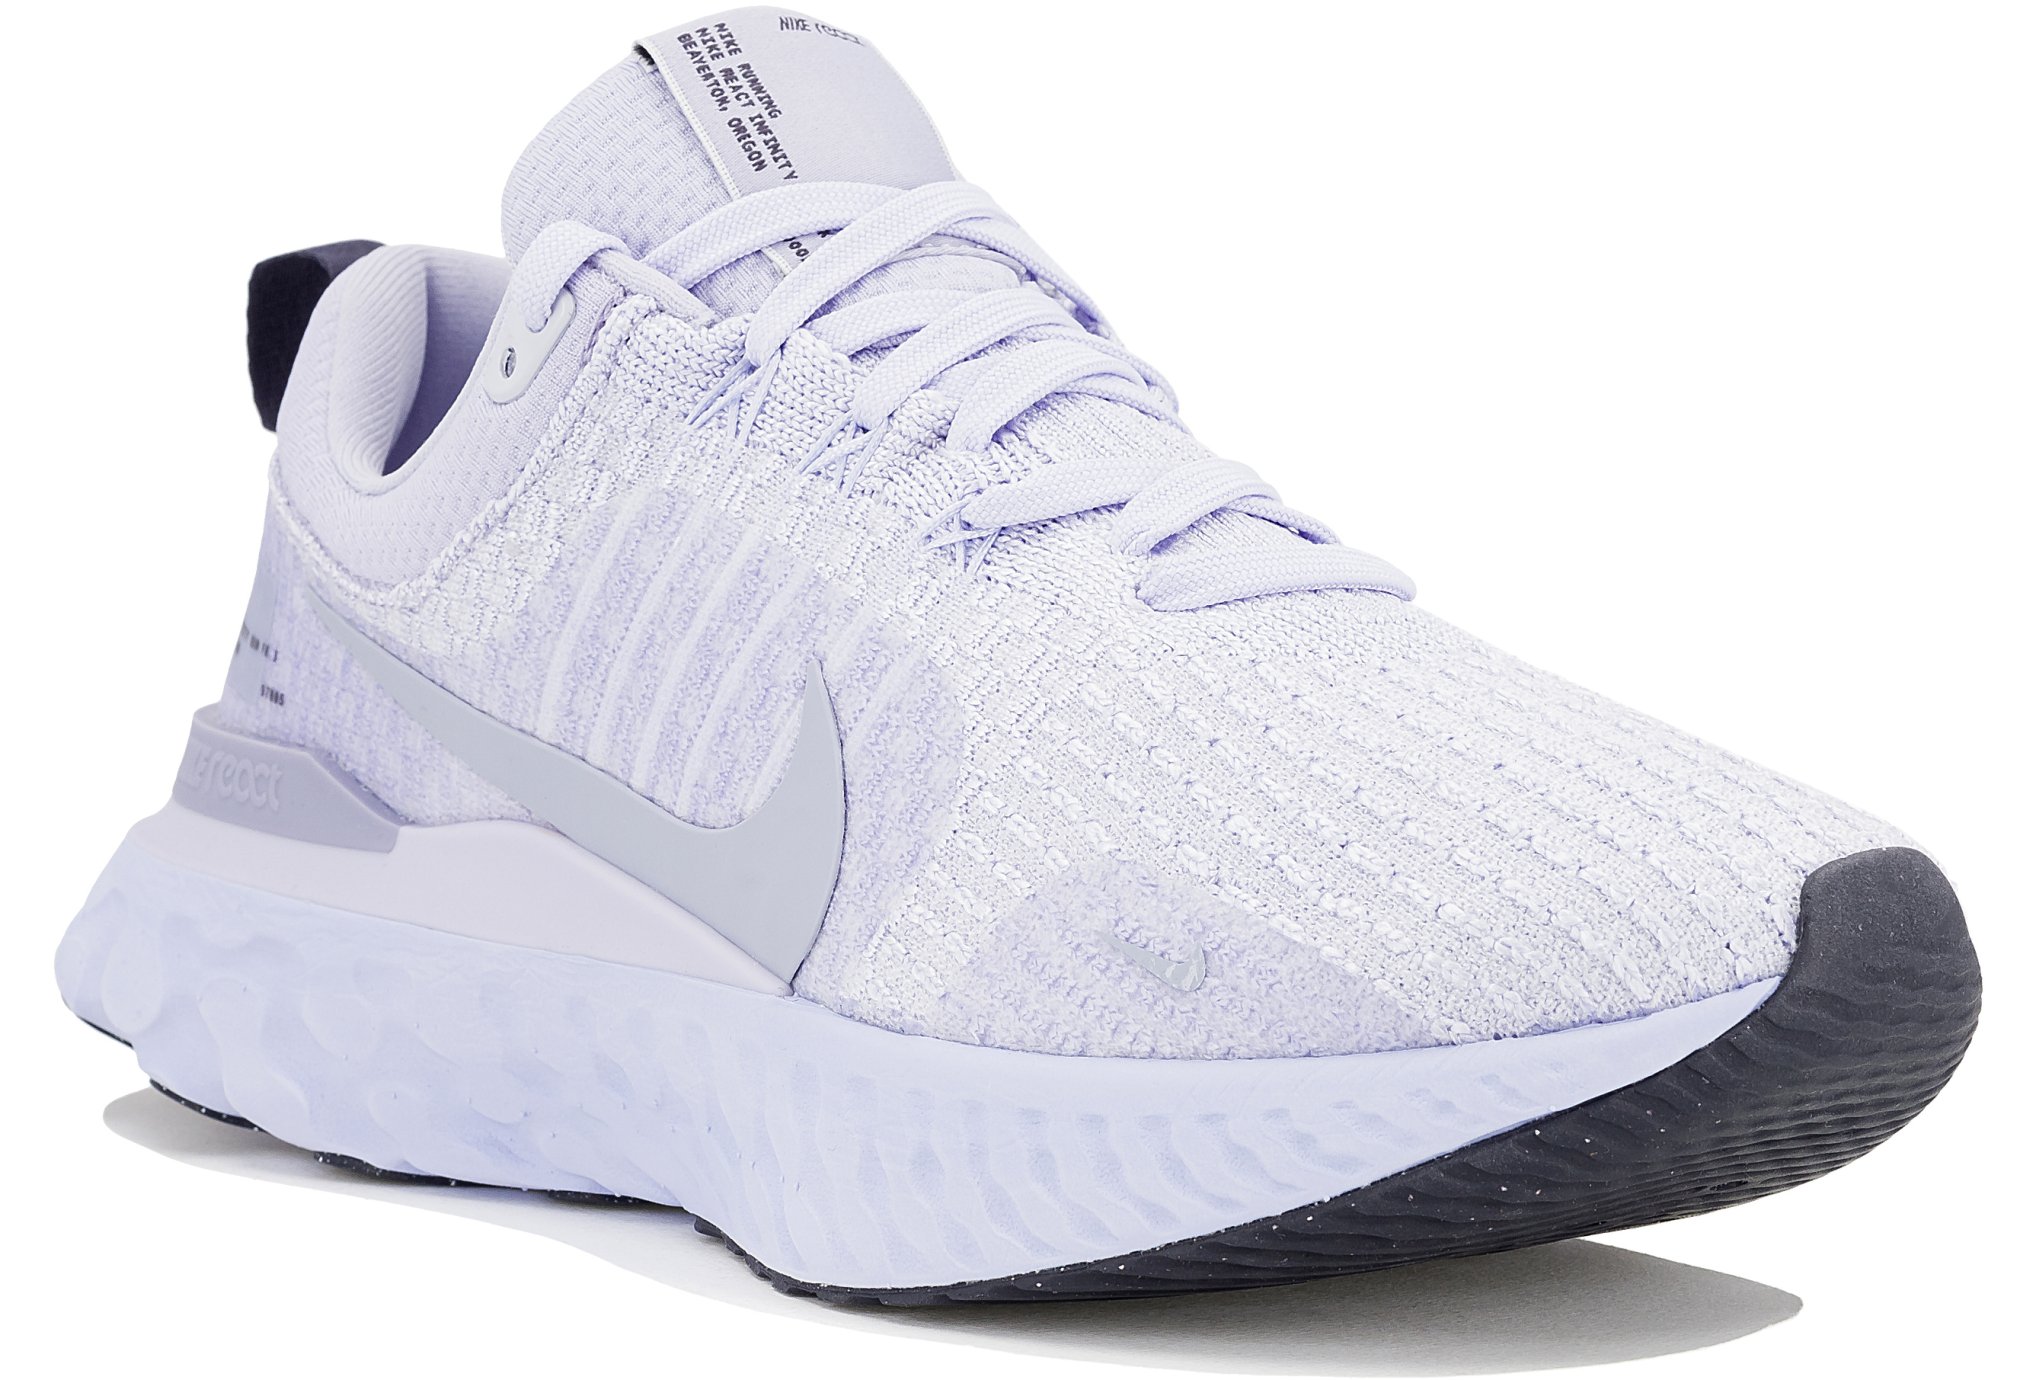 Chaussure de running sur route Nike React Infinity Run Flyknit 3 pour homme